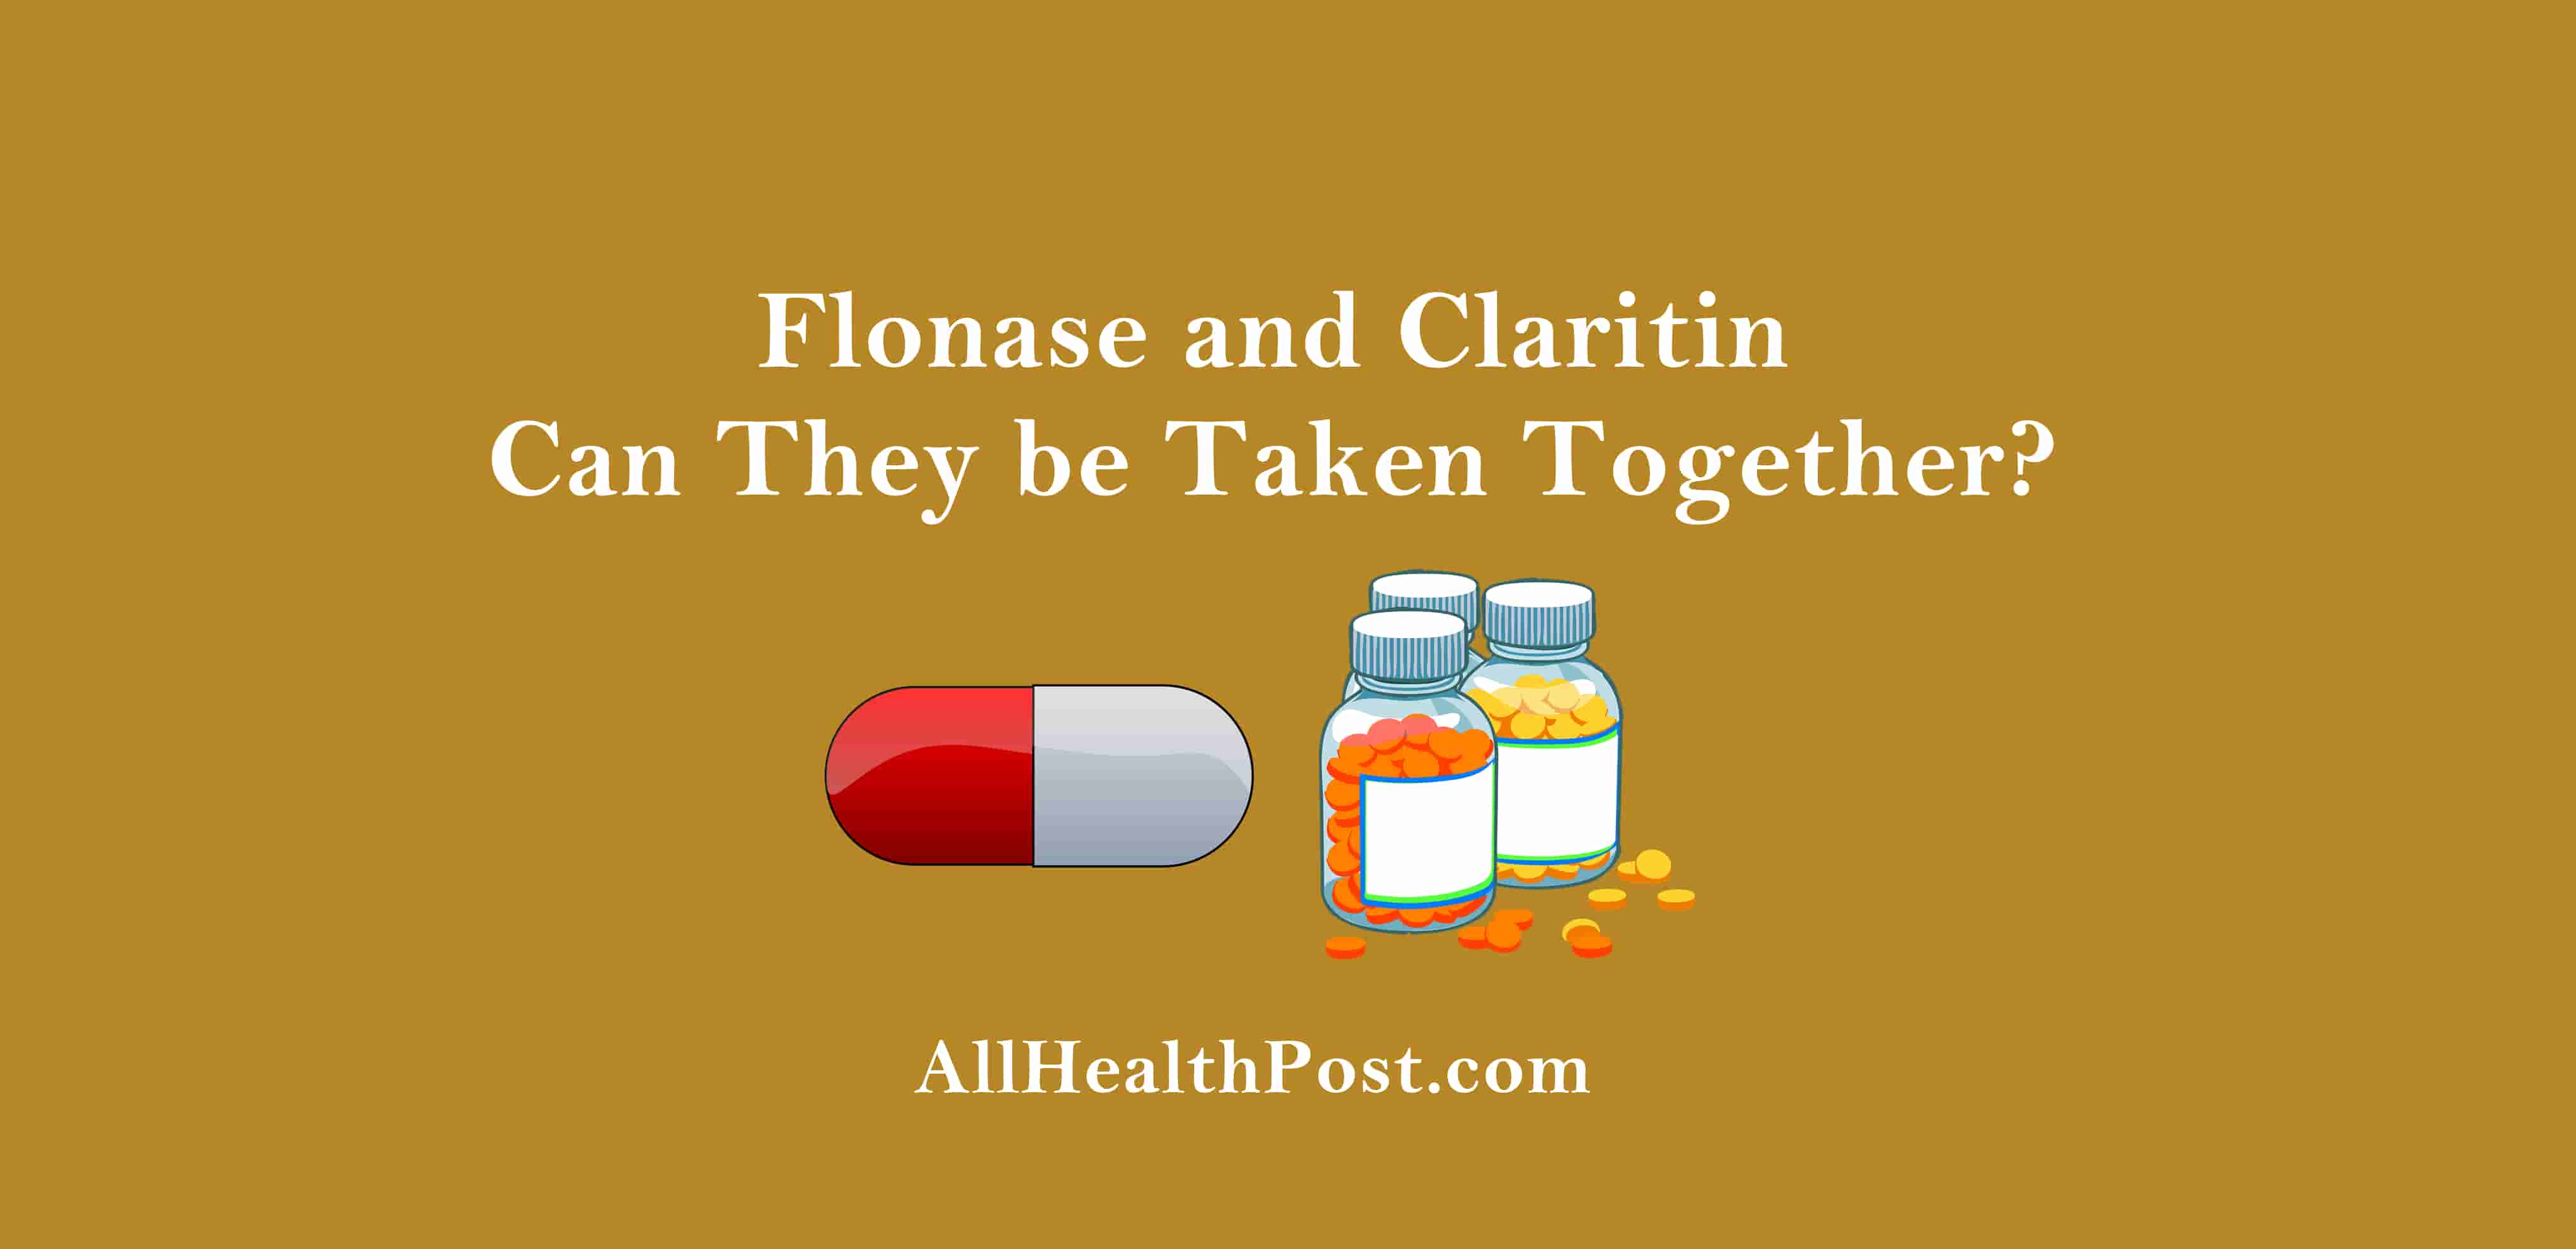 Flonase and Claritin Can They be Taken Together